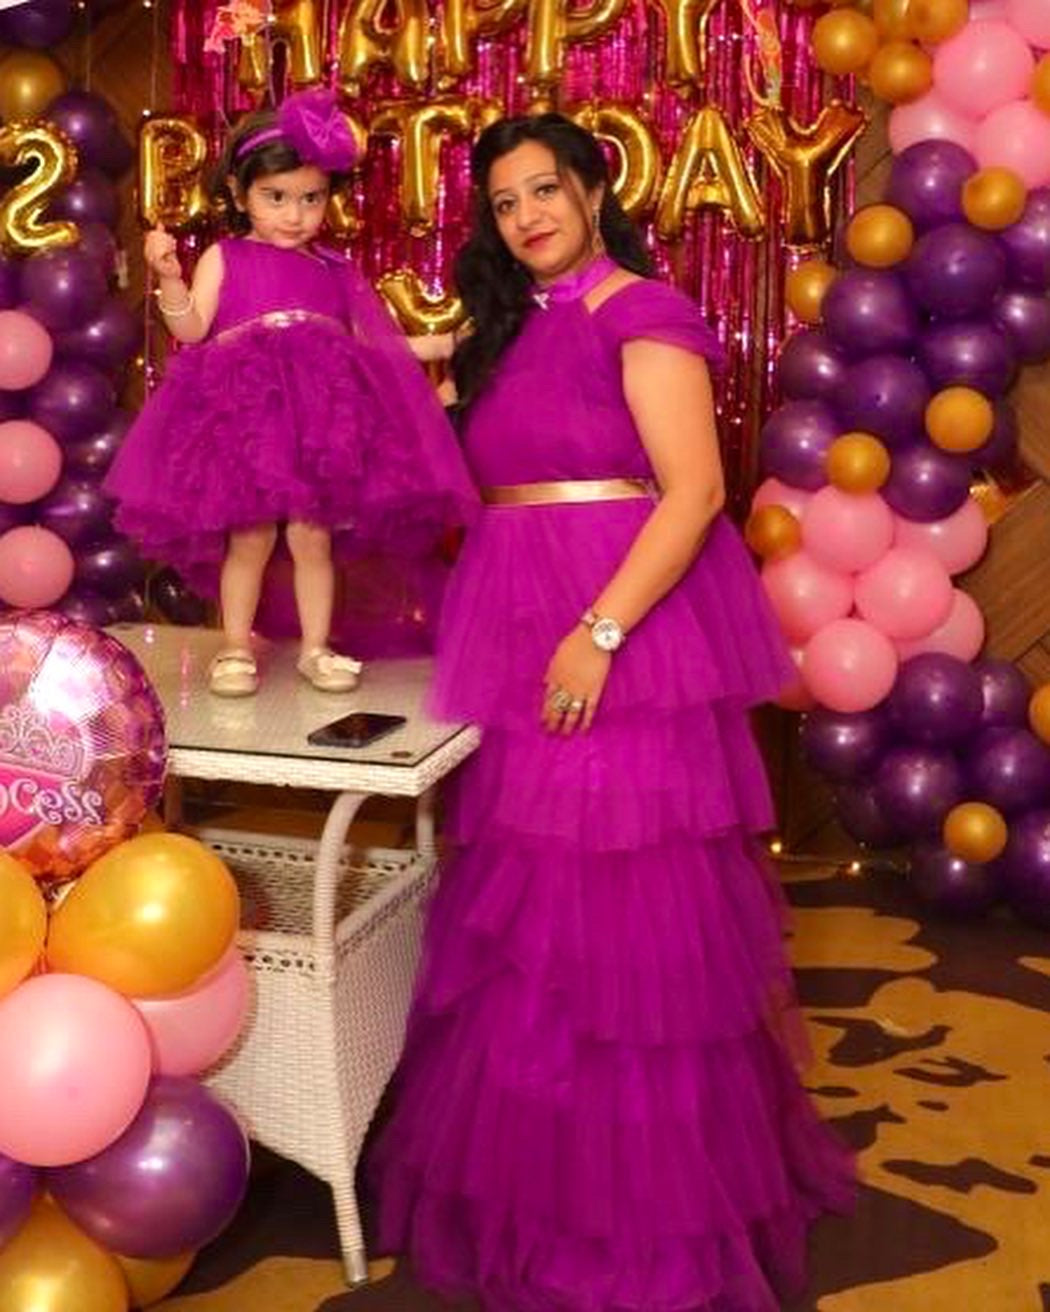 EINCcm Ball Gown Dresses for Girls, Net Yarn Bowknot Princess Dresses  Birthday Party Flowers Gown for Toddler Kids Baby Girl, Hot Pink,7-8 Years  - Walmart.com